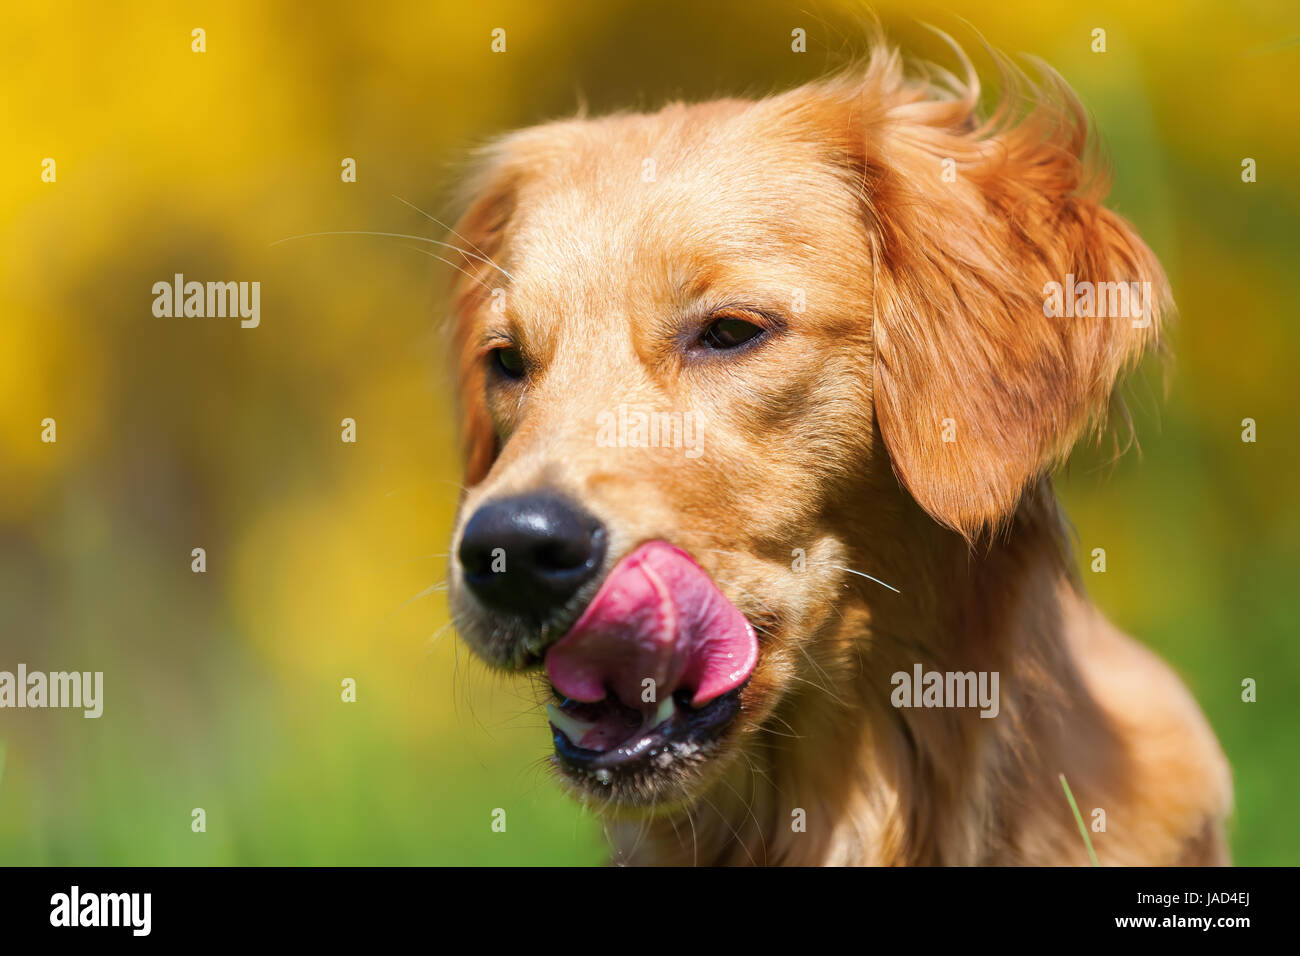 head portrait picture of a young golden retriever Stock Photo